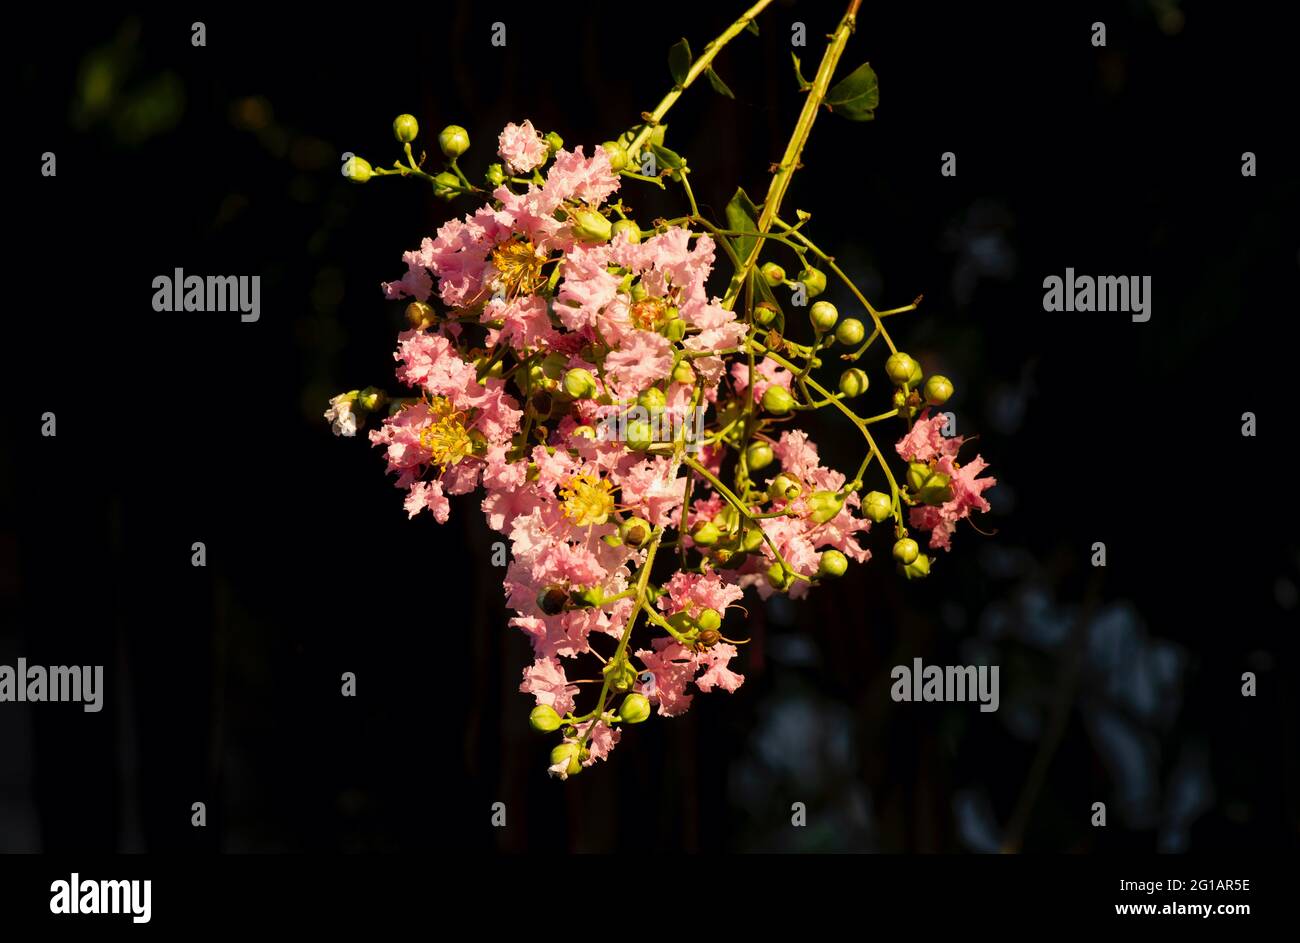 Tabebuia rosea pink flower, shallow focus, with dark blurred background Stock Photo